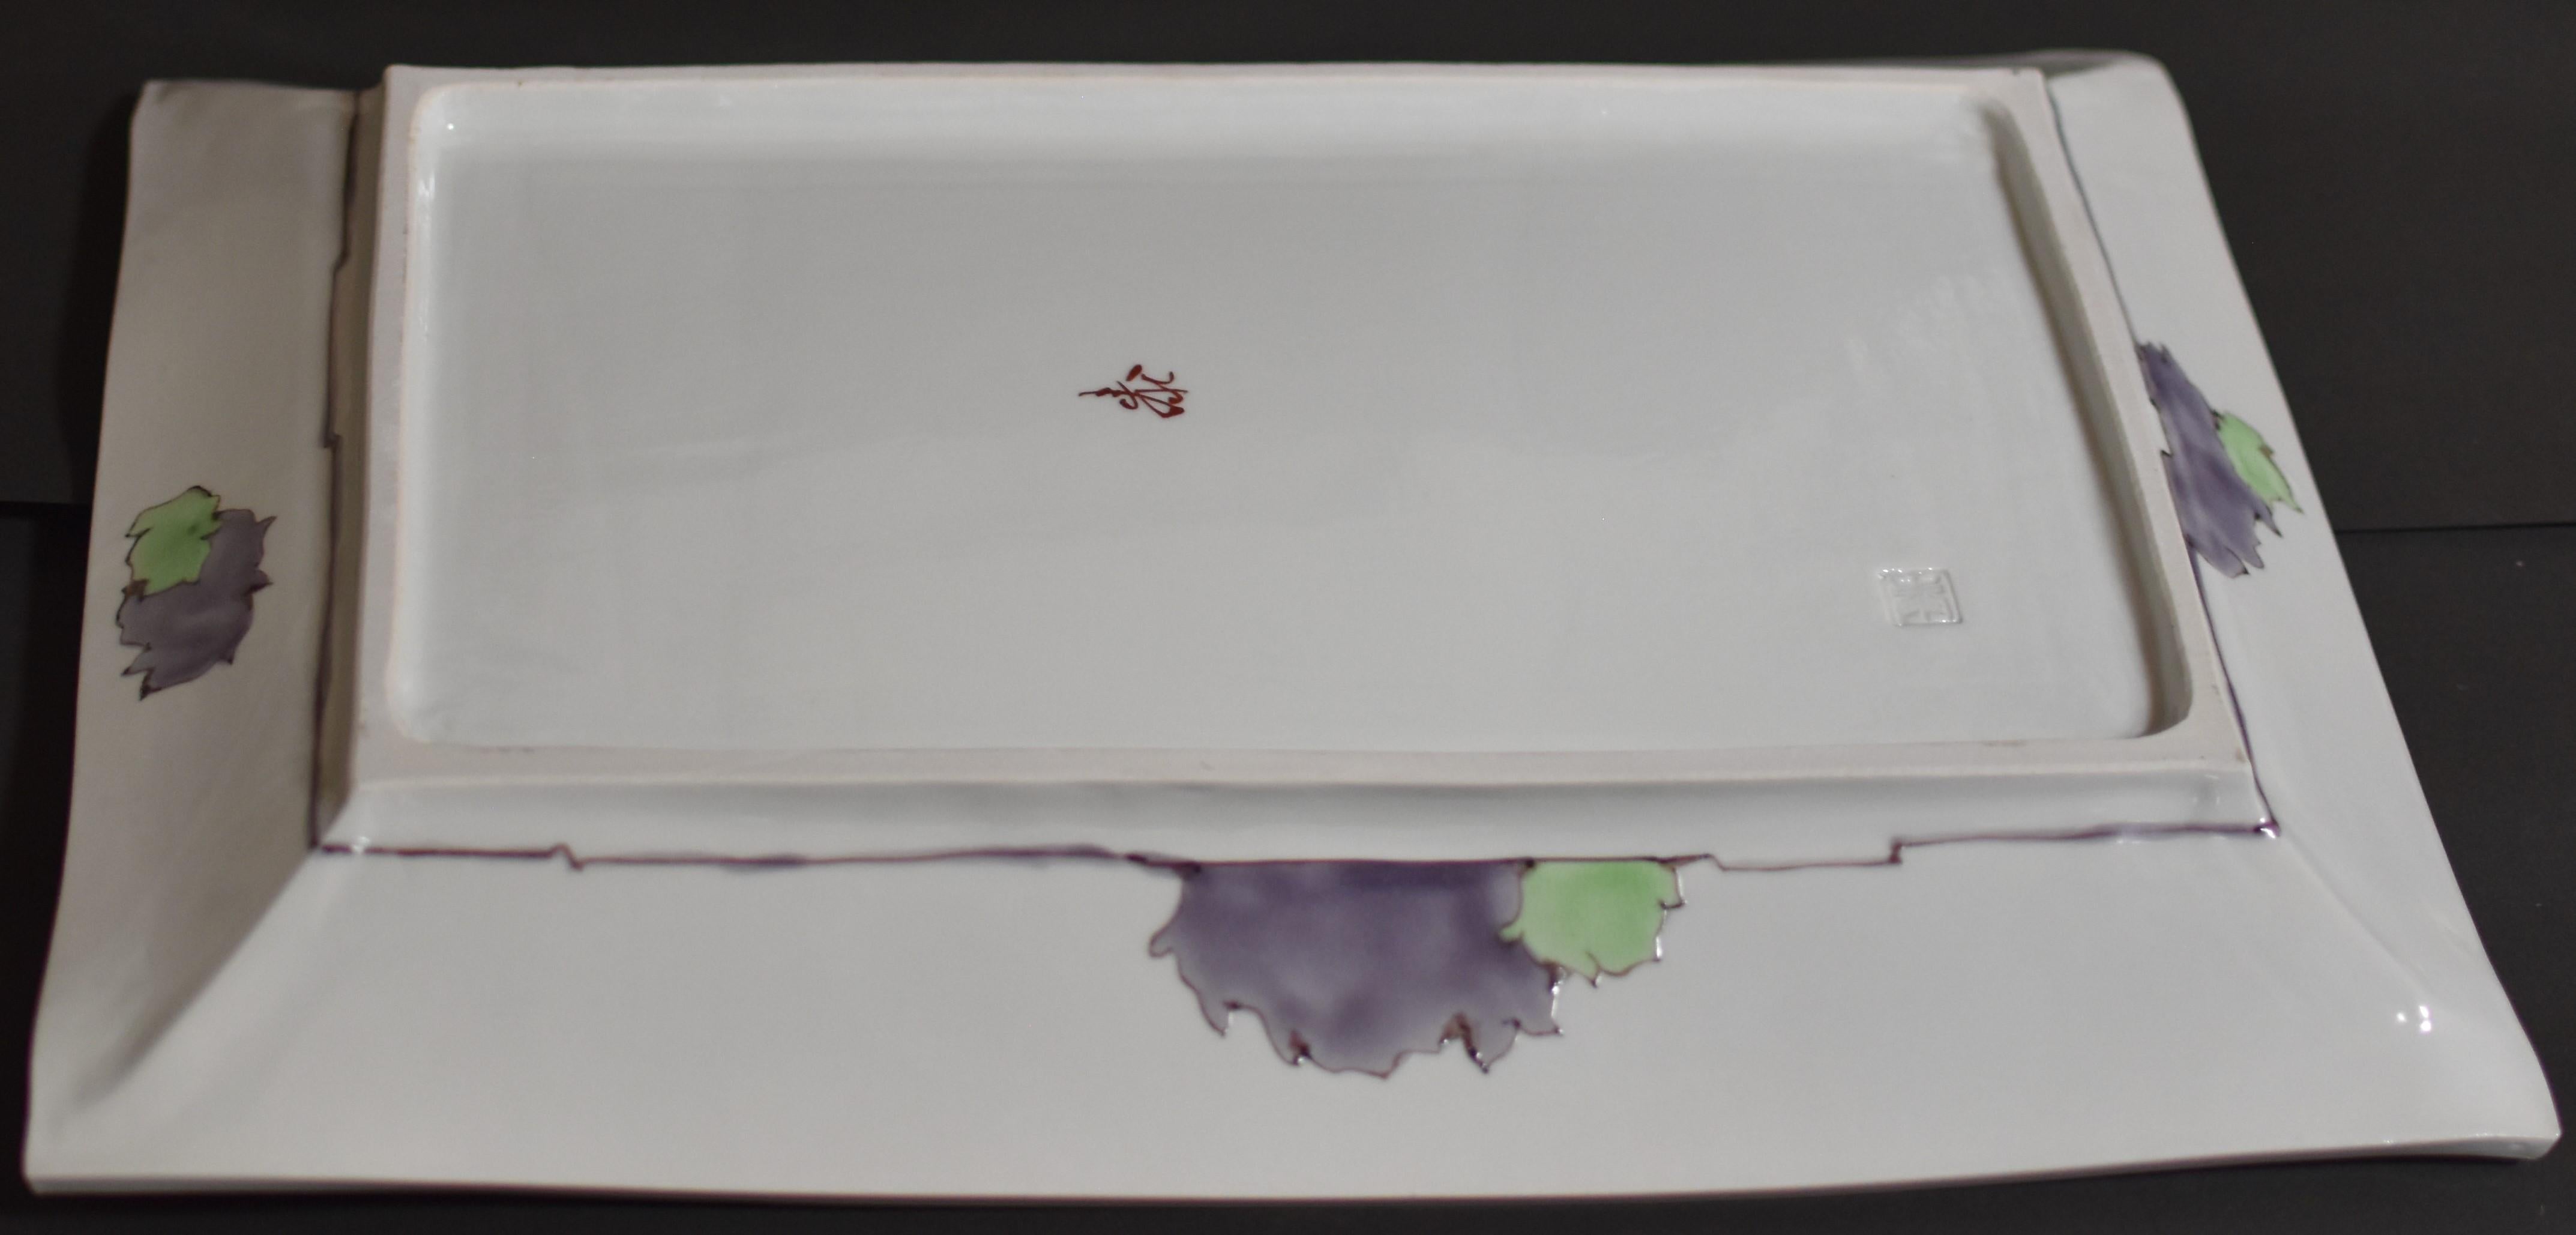 Extraordinary Japanese contemporary museum-quality decorative porcelain charger, stunningly hand painted in royal purple and yellow on a beautiful rectangular shape body, with a unique interpretation of giraffes, the artist's signture pattrn. This